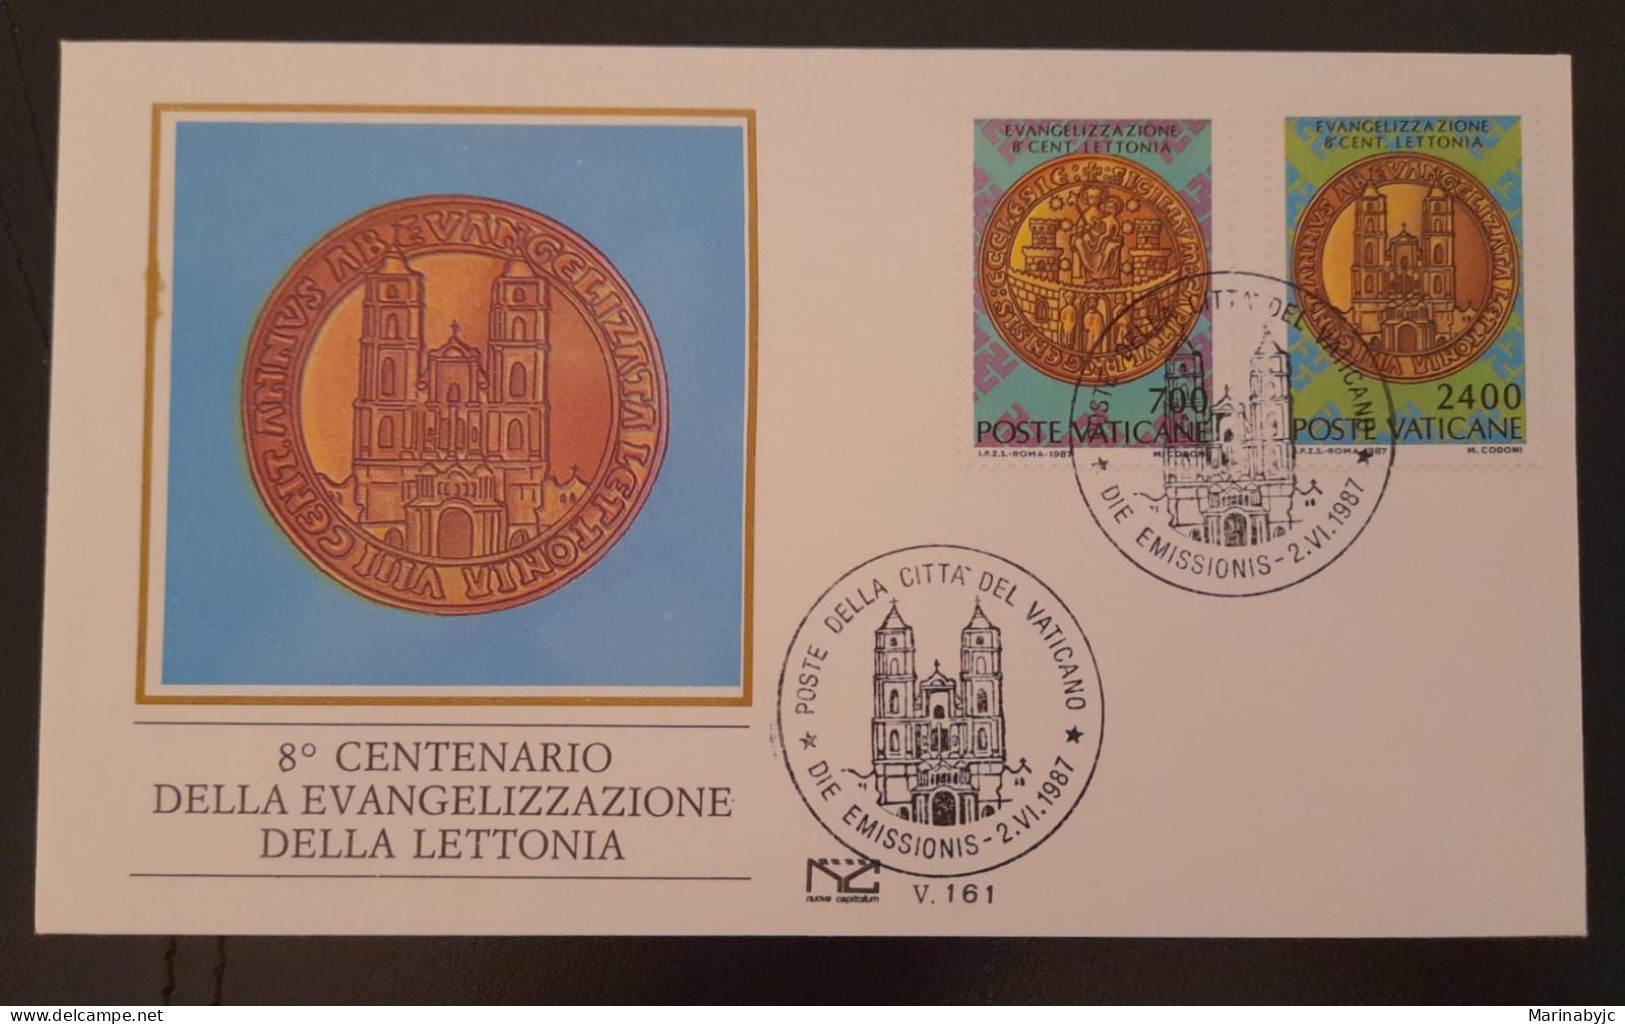 SD)1987, VATICAN CITY, ON FIRST DAY OF ISSUE, COINS, 8TH CENTARY OF THE EVANGELIZATION OF LATVIA, FDC, - Covers & Documents